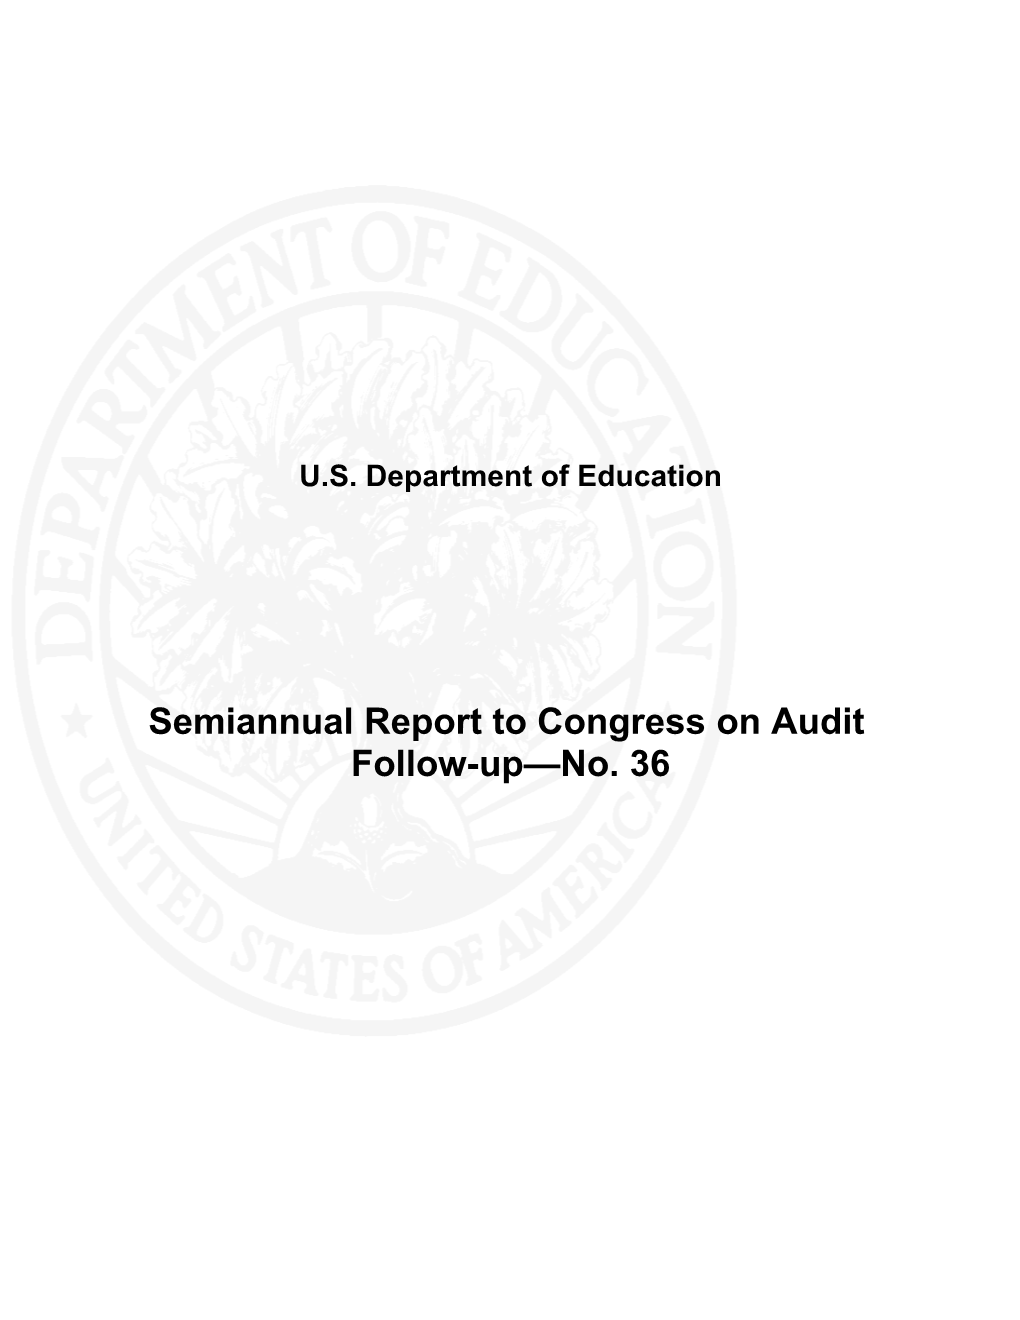 Semiannual Report to Congress on Audit Follow-Up-No. 36 April 2008 (Msword)